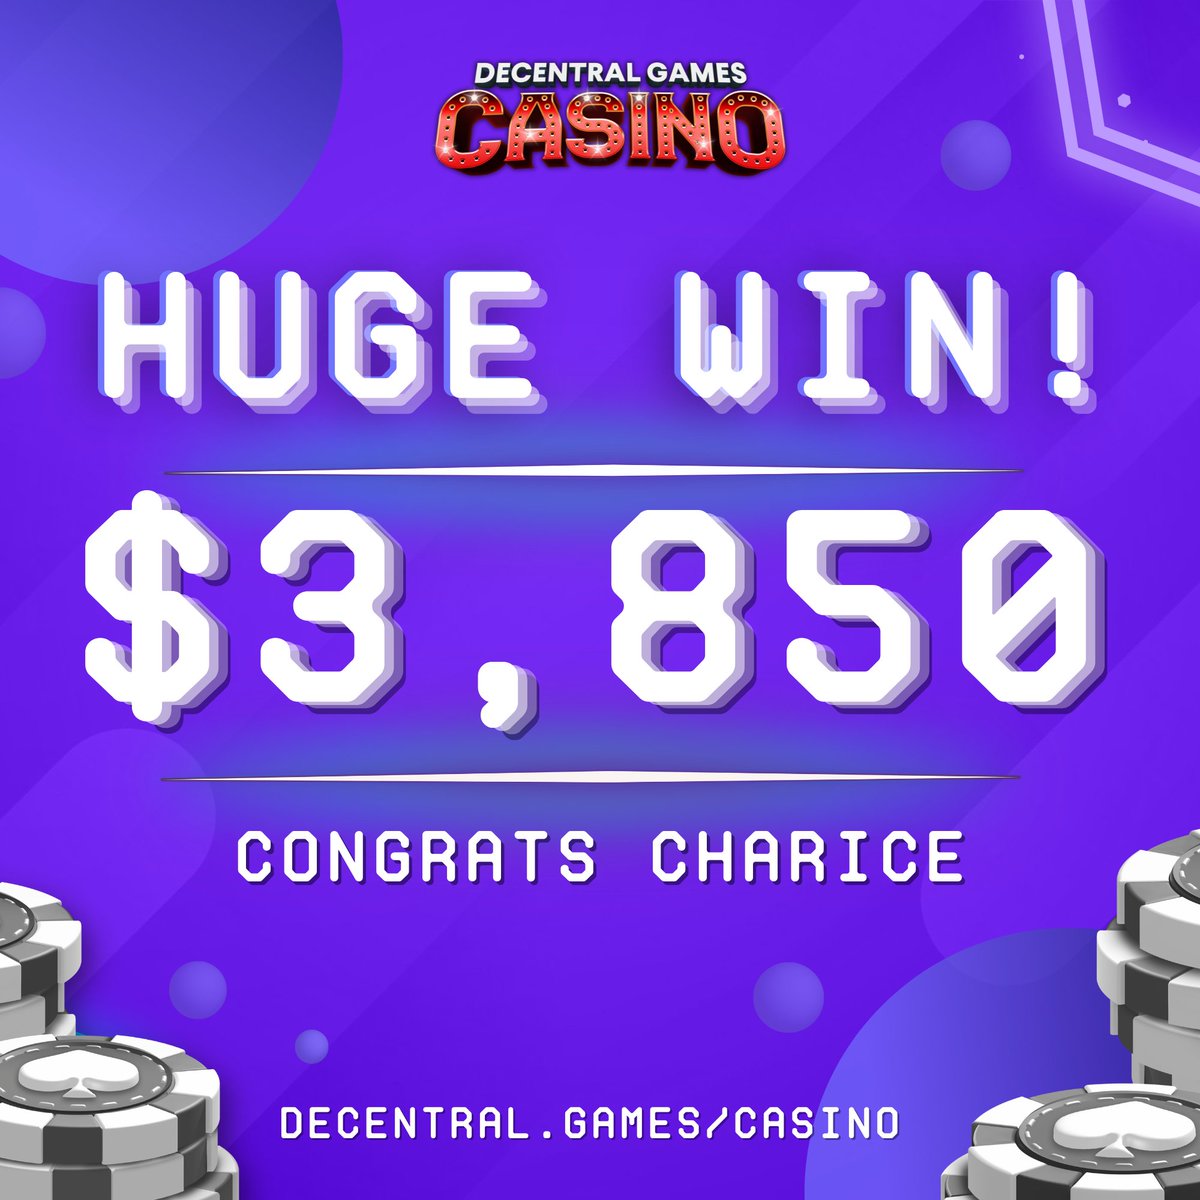 Congrats to Charice on winning $3,850 in yesterday's casino competition and placing 1st on the leaderboard! By placing 1st, they also won 200 Blast Gold, 90k $BAG, and 30 Arcade Tickets